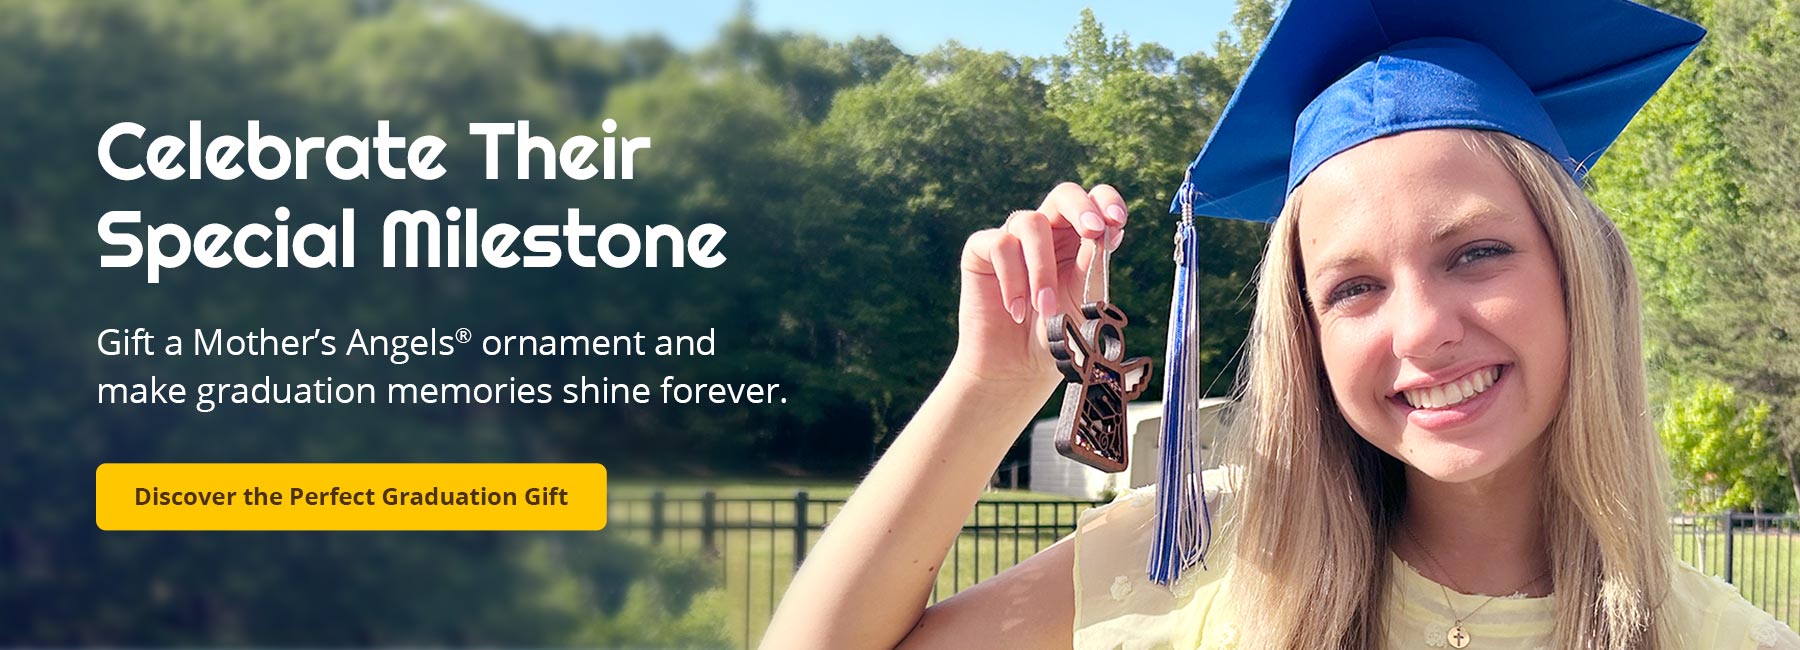 Celebrate Their Special Milestone. Gift a Mother’s Angels® ornament and make graduation memories shine forever. Discover the Perfect Graduation Gift.